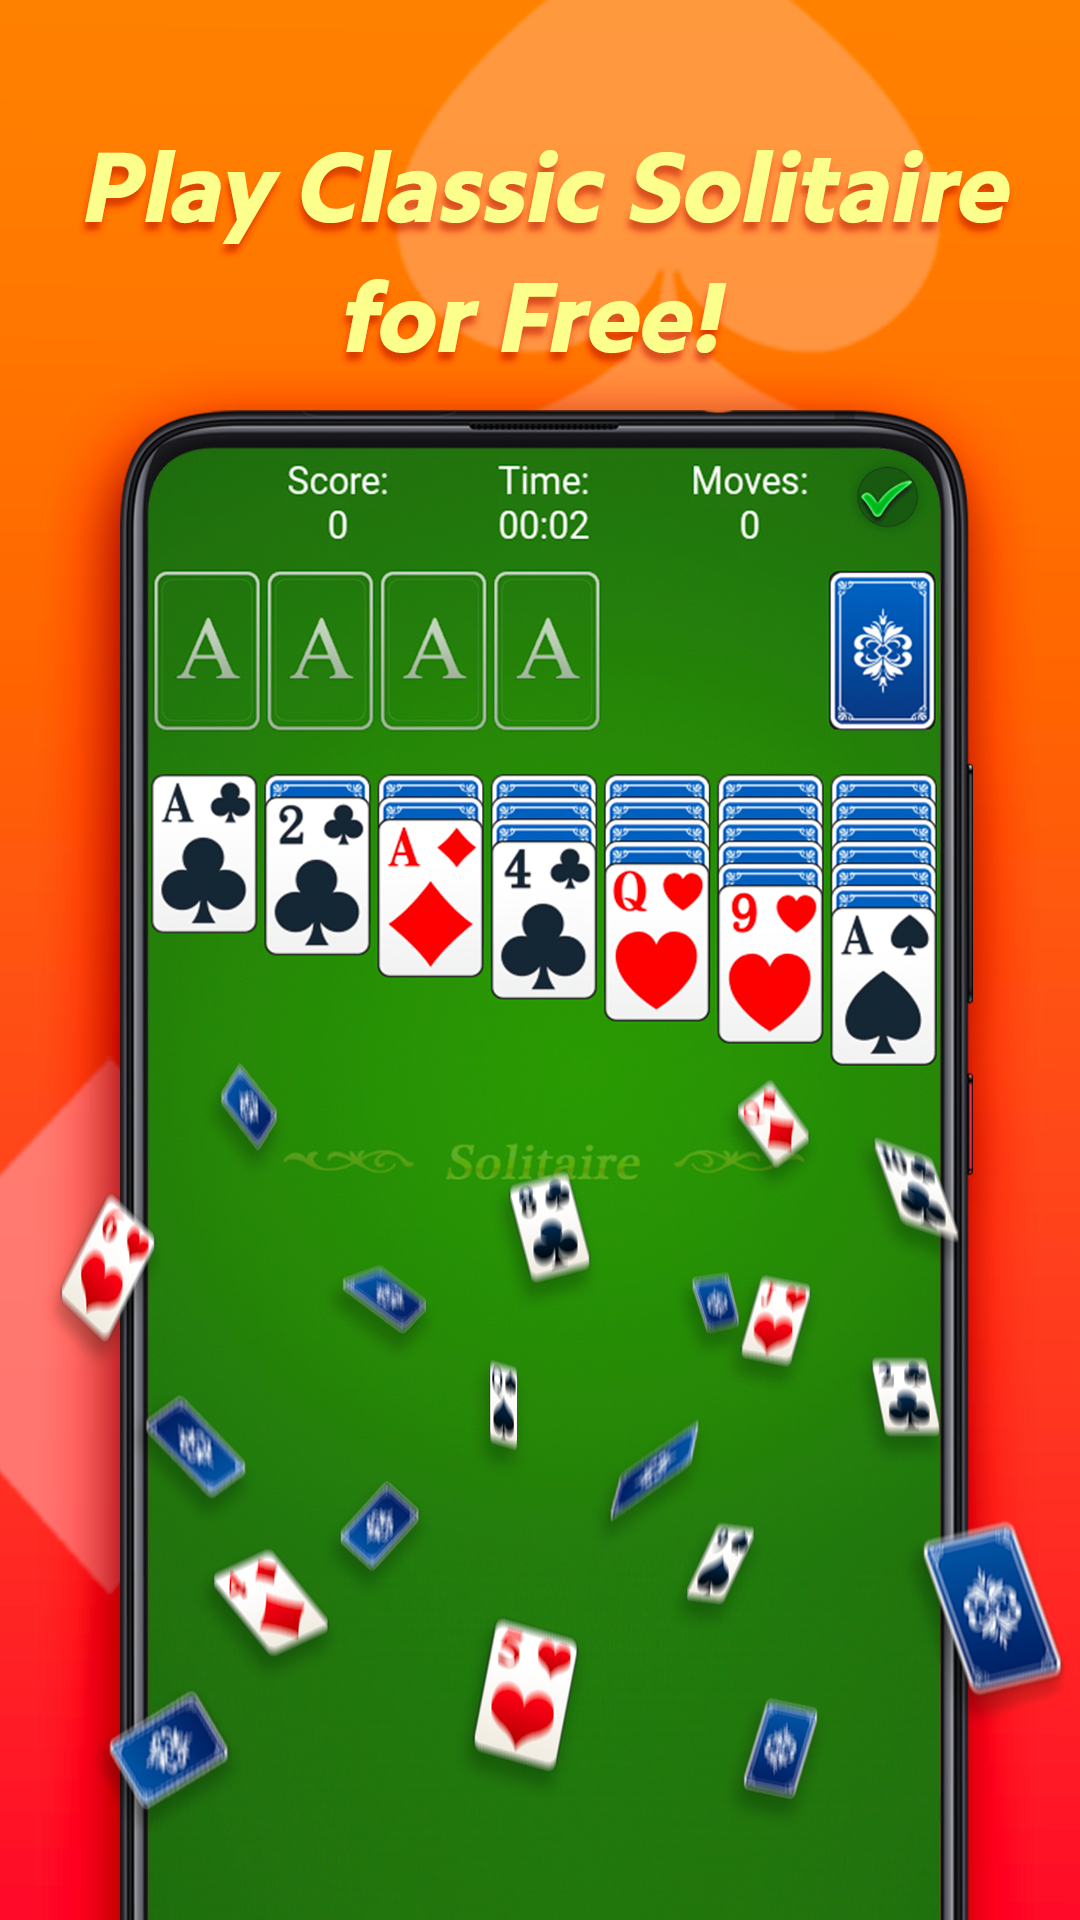 Screenshot 1 of Solitaire Classic - 2020 年免費撲克遊戲 1.3.2